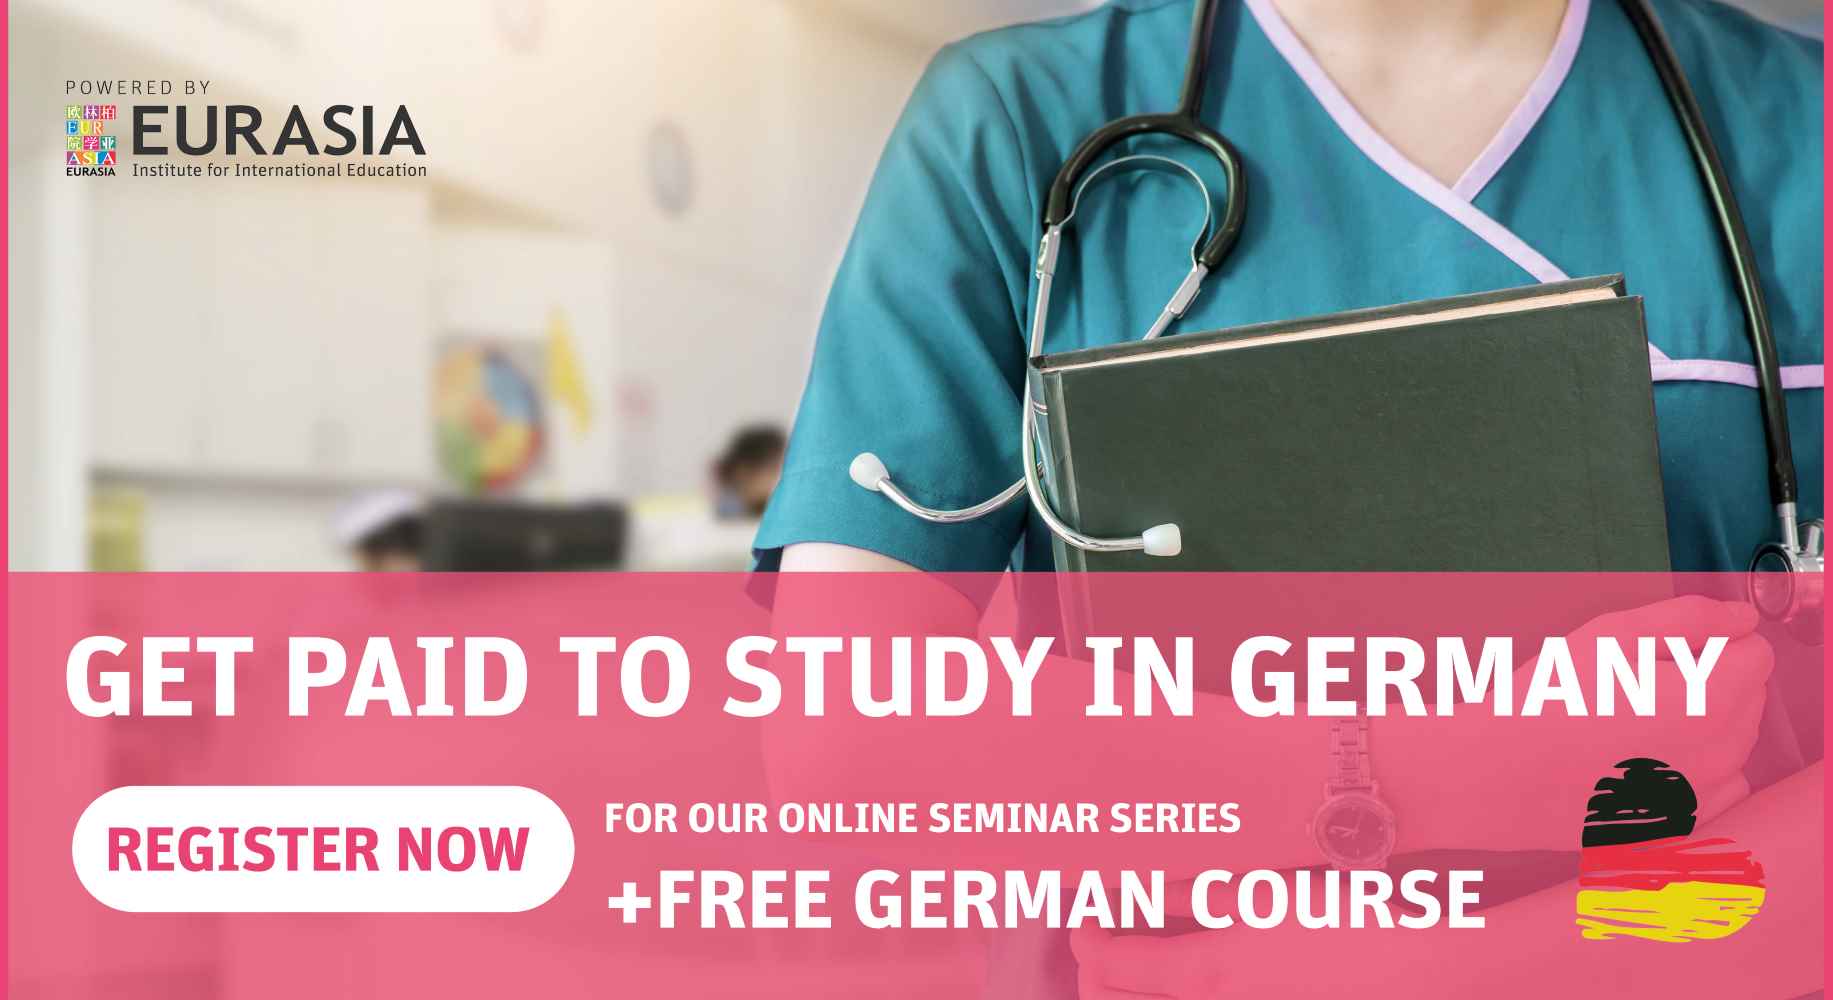 Get Paid to Study in Germany - Nursing Traineeship